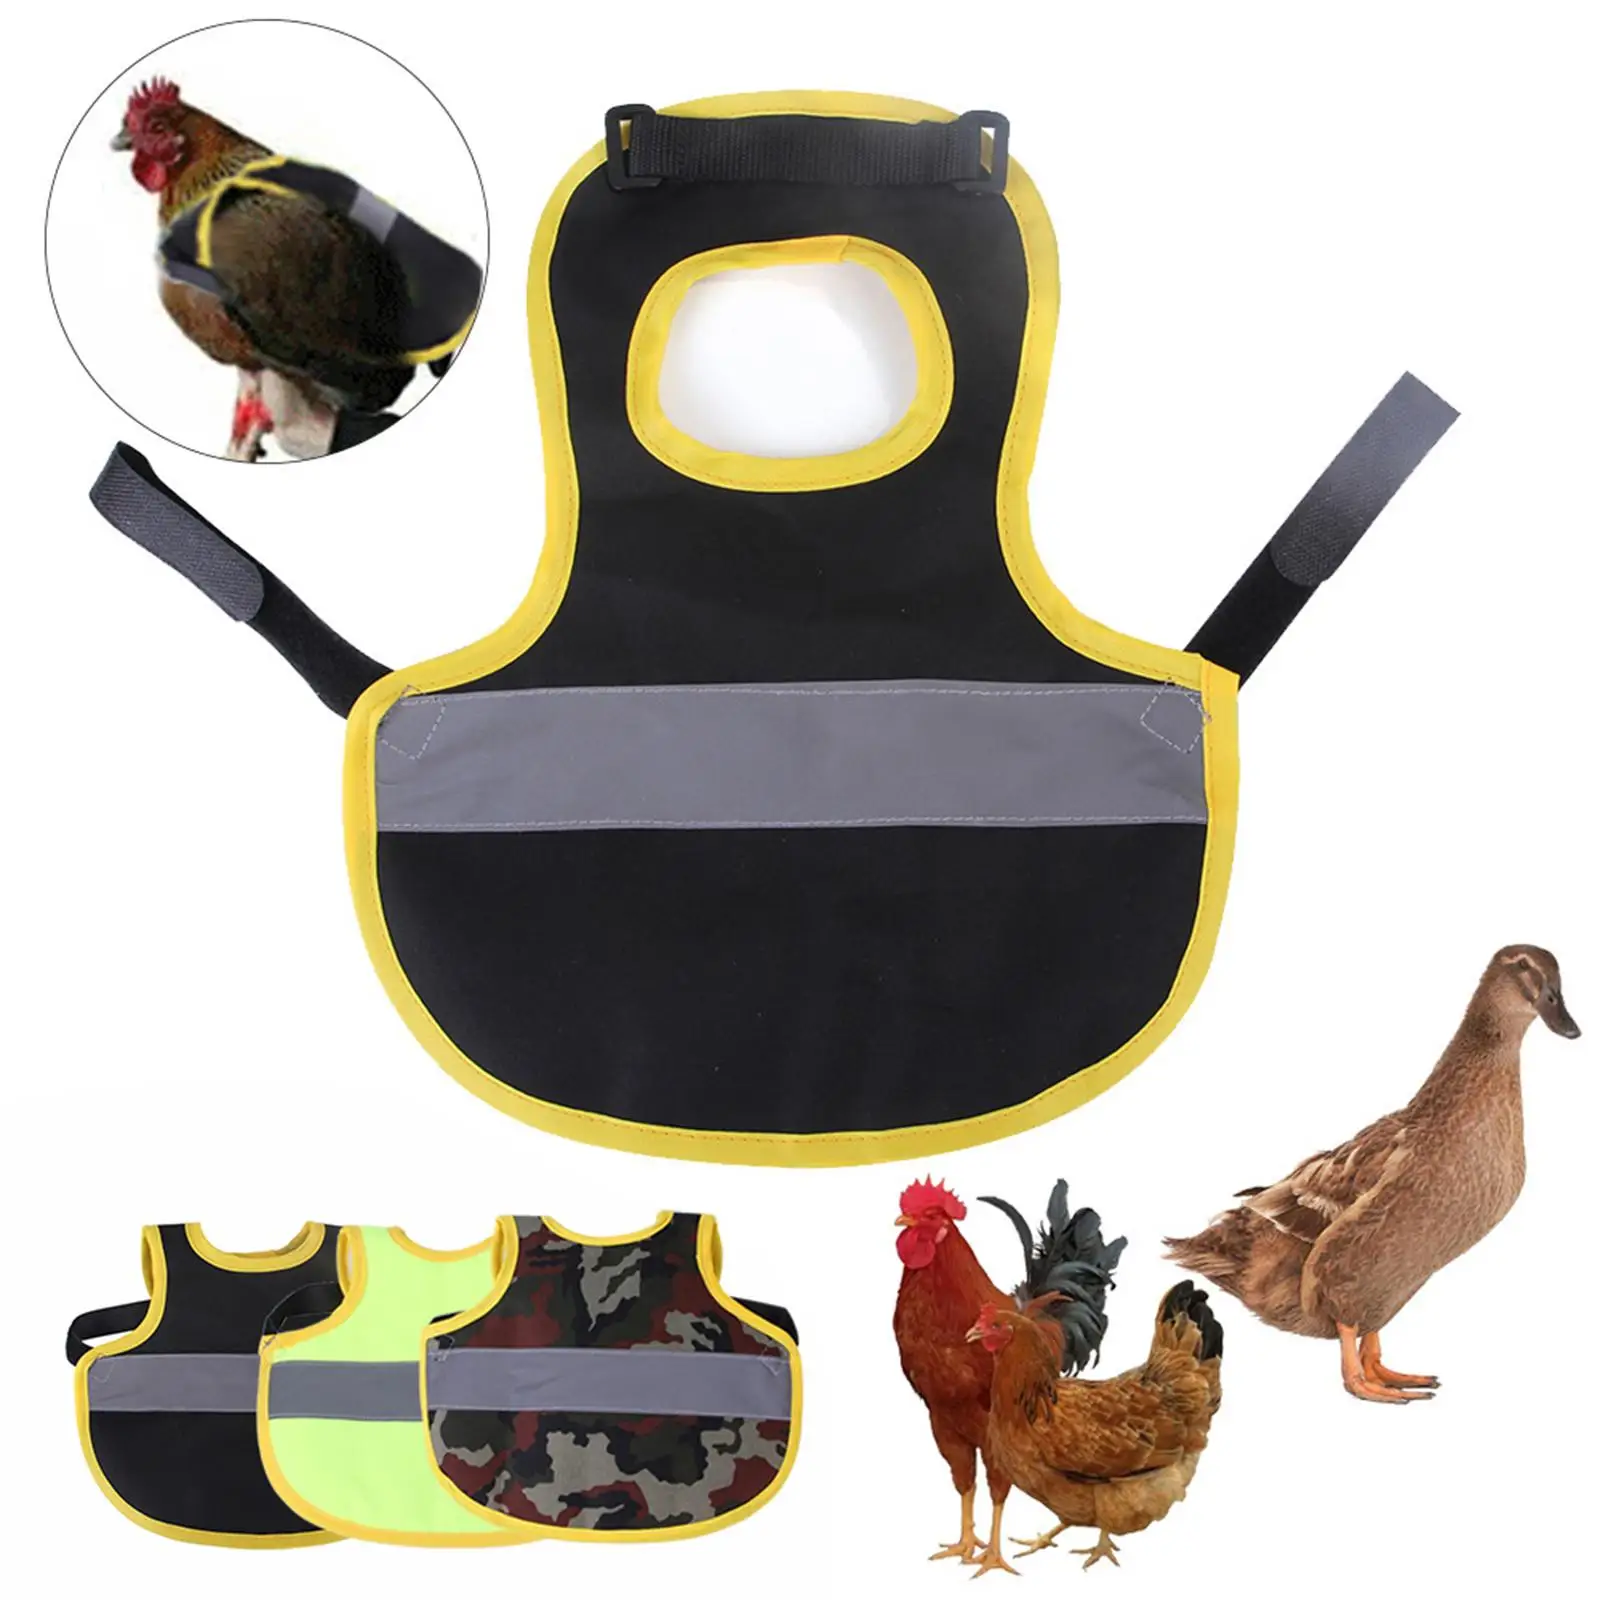 Adjustable Chicken Saddle Hen Apron Protect Wing Jacket Reflective Suit Protector Standard Size Suit Small Medium and Large Hens